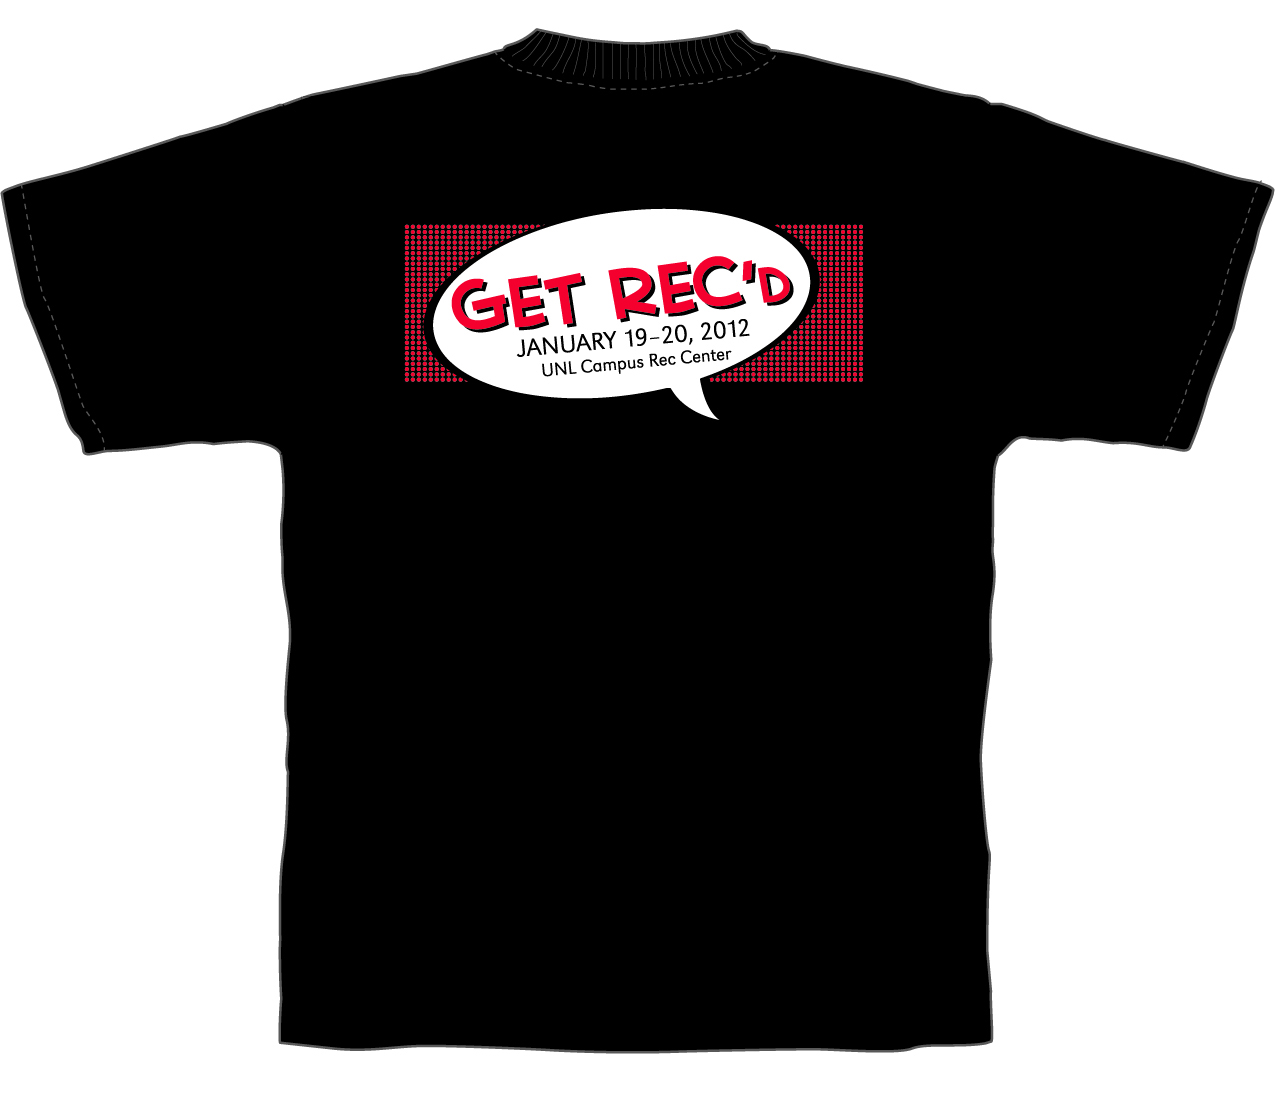 GET REC'd attendees receive a free t-shirt when they sign up to participate in the American Cancer Society's Relay for Life.